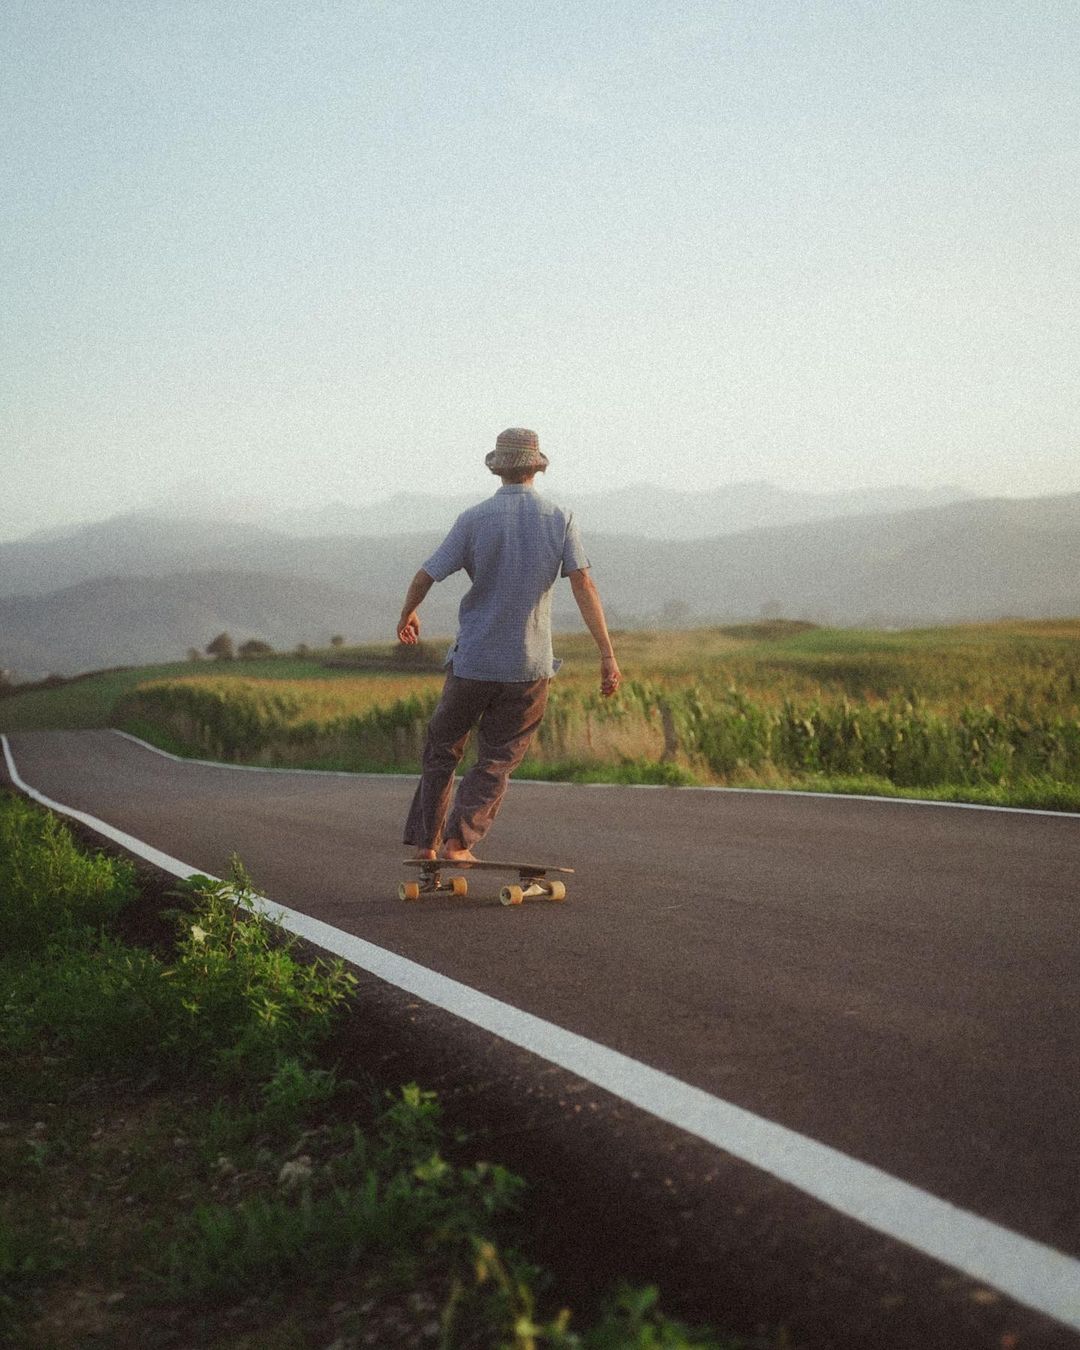 Guy longboarding barefoot on a paved road in Cantabria during small group travel.